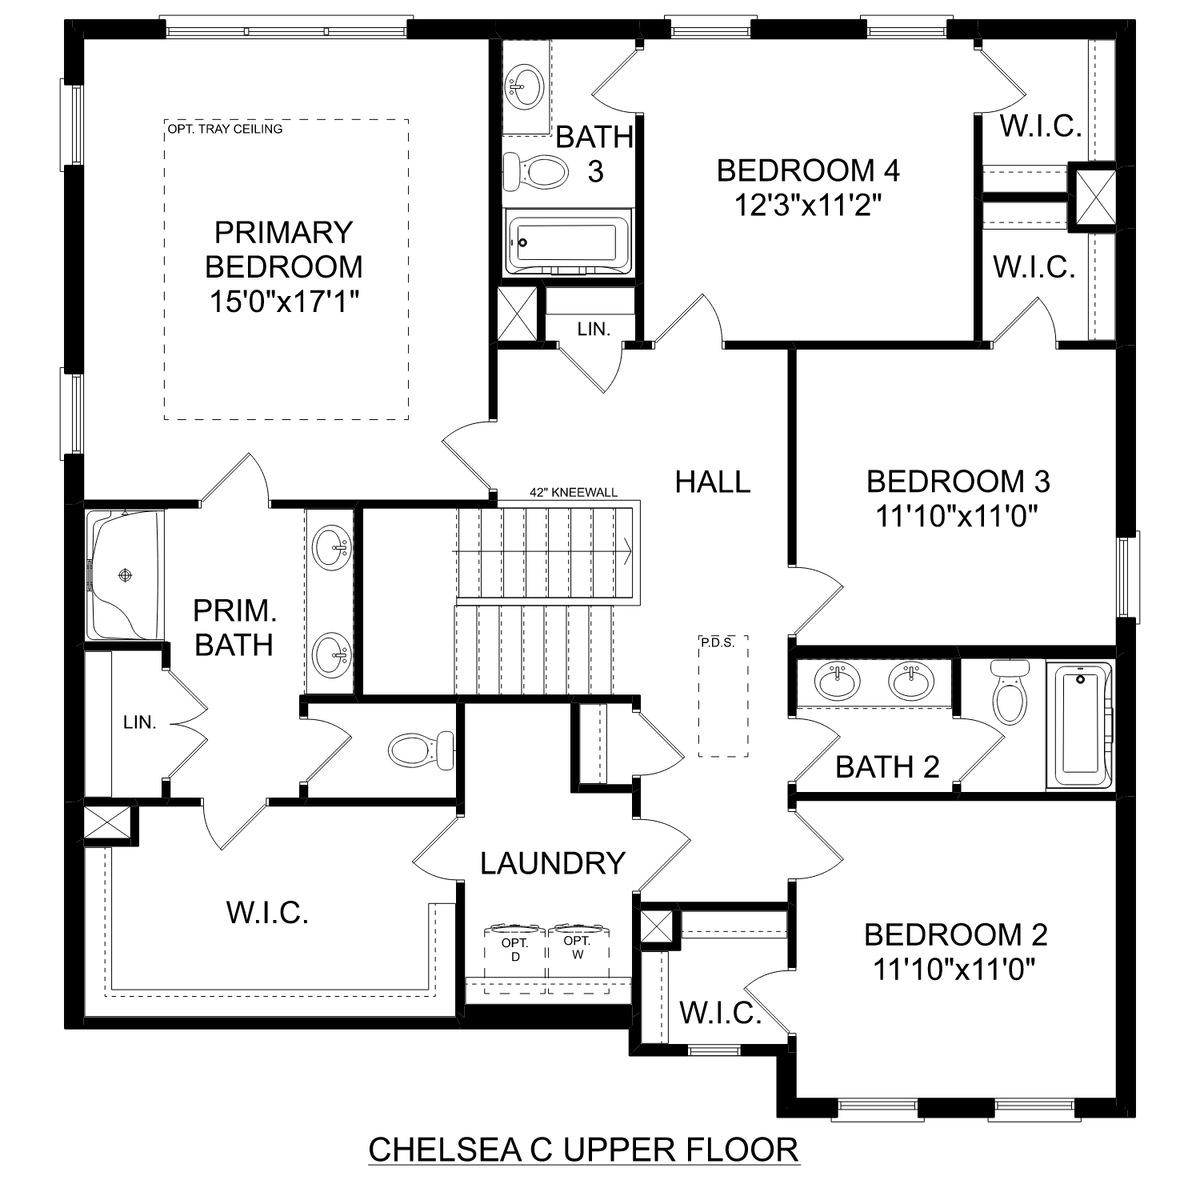 2 - The Chelsea C floor plan layout for 113 Wilcot Road in Davidson Homes' Walker's Hill community.